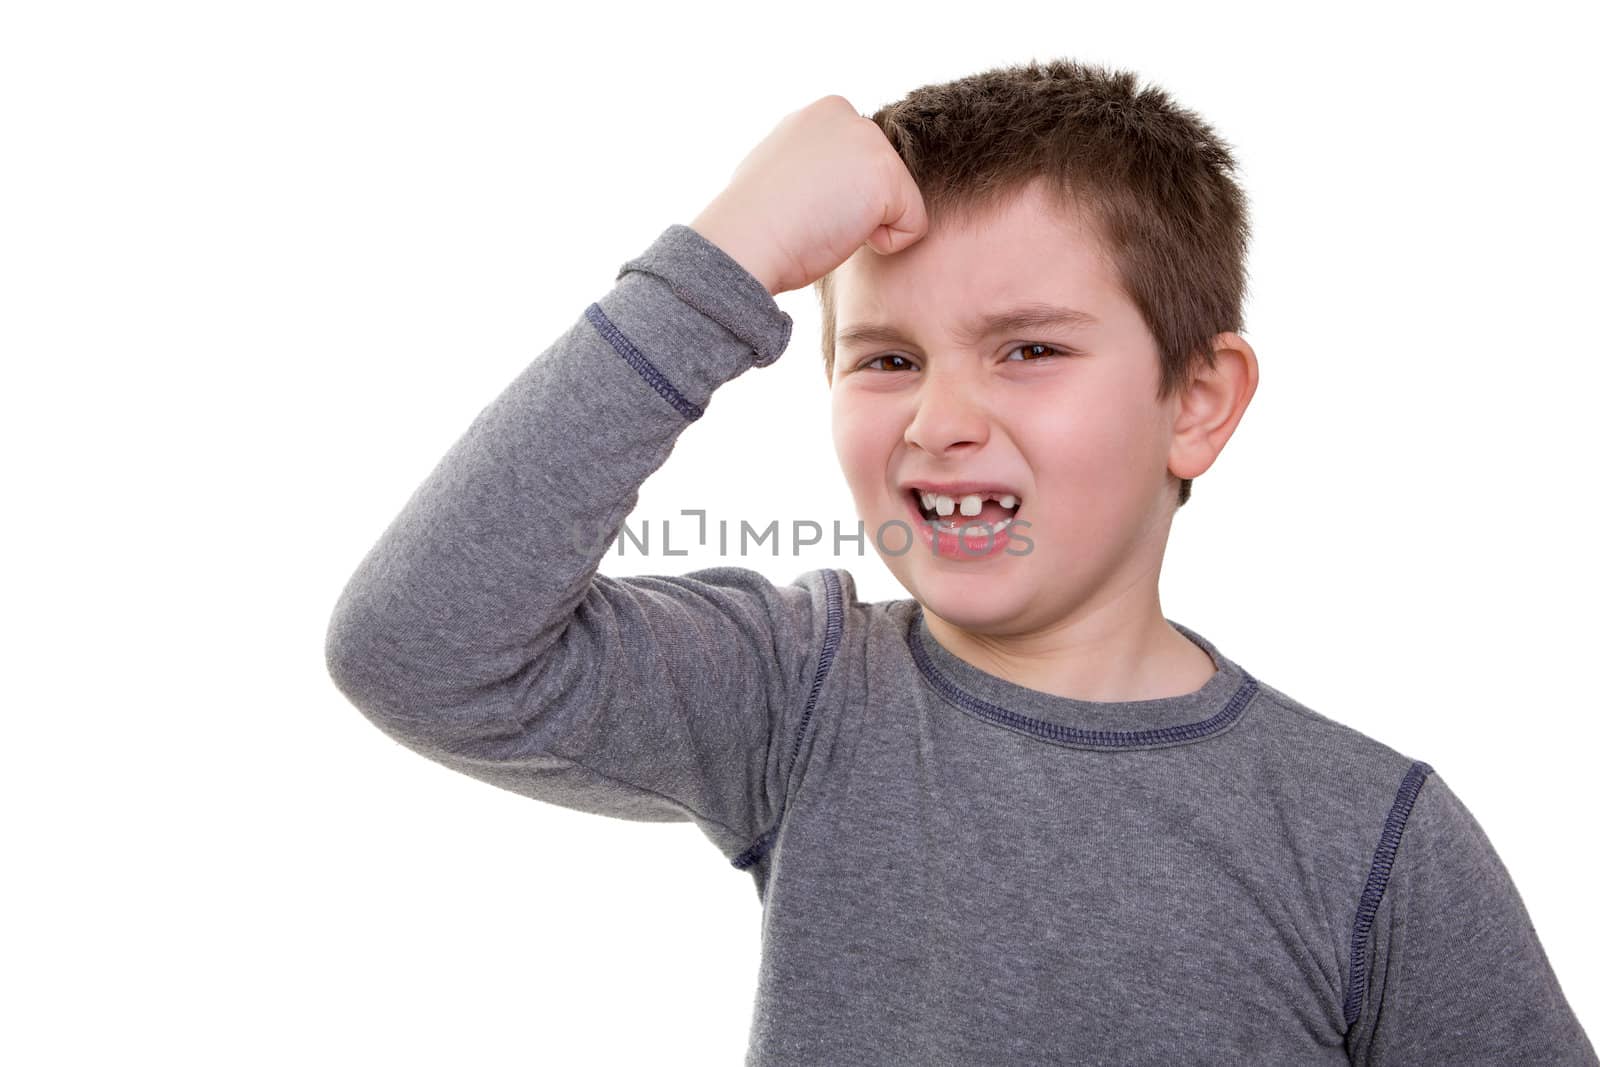 Kid knocking his head  looks very regretful about what he did